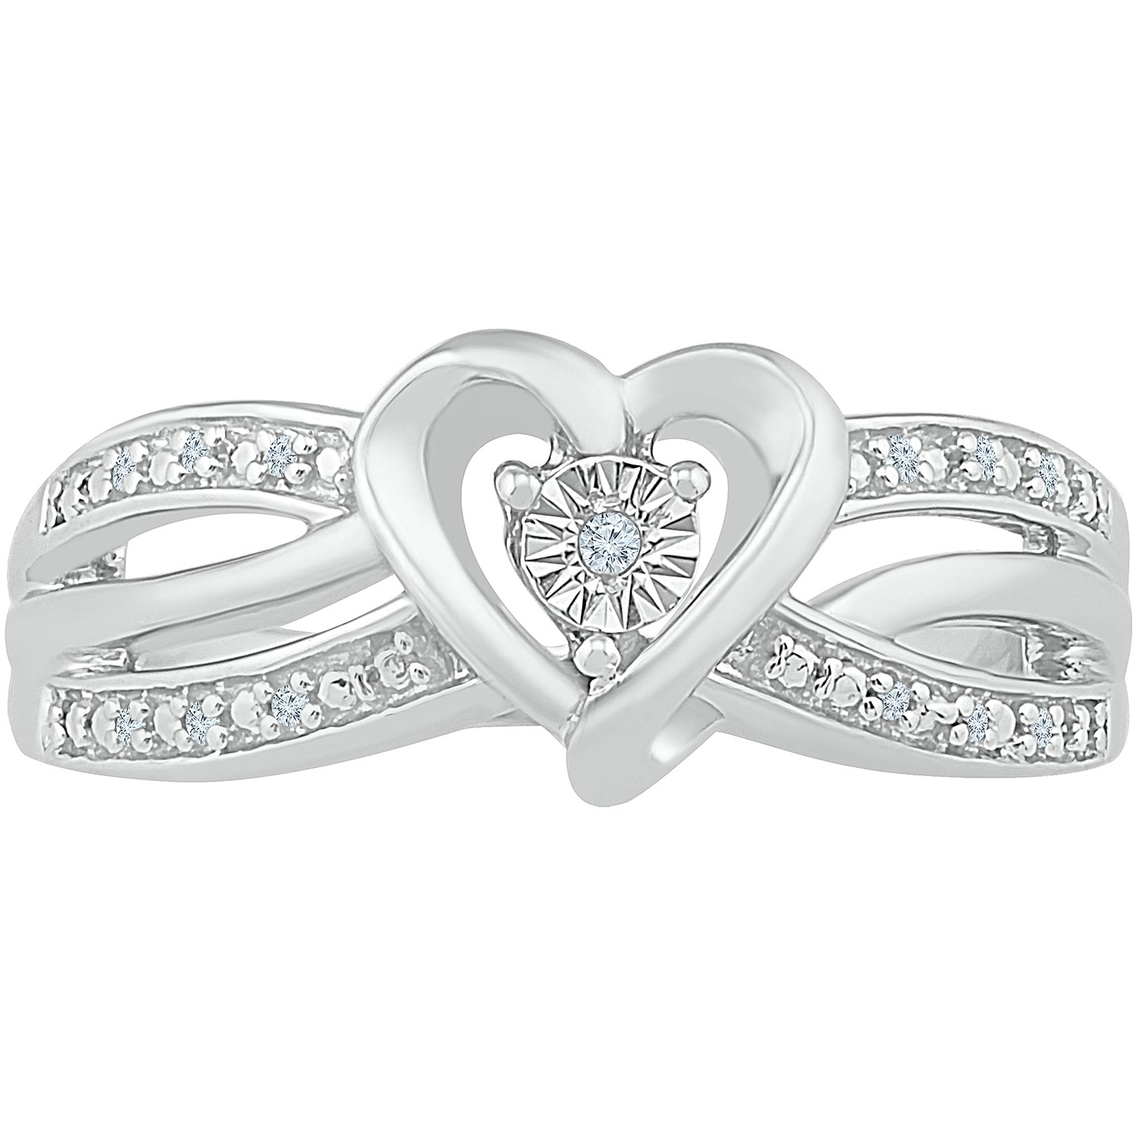 Sterling Silver with Diamond Accent Heart Promise Ring - Image 2 of 2